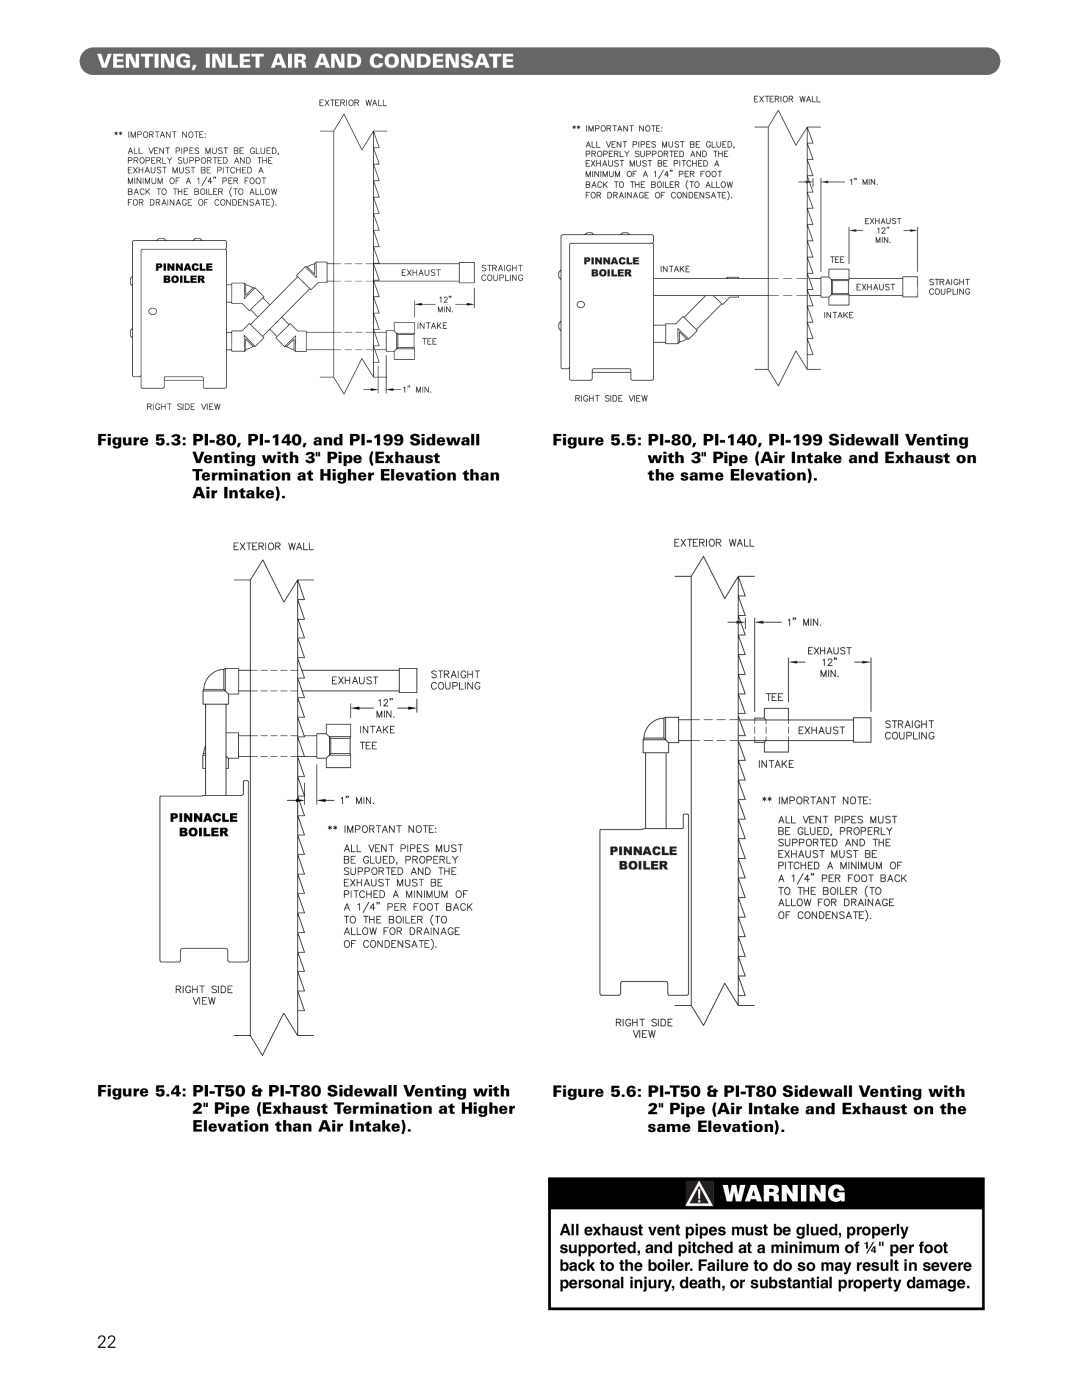 PB Heat Gas Boiler manual Venting, Inlet Air And Condensate, 3 PI-80, PI-140,and PI-199Sidewall 